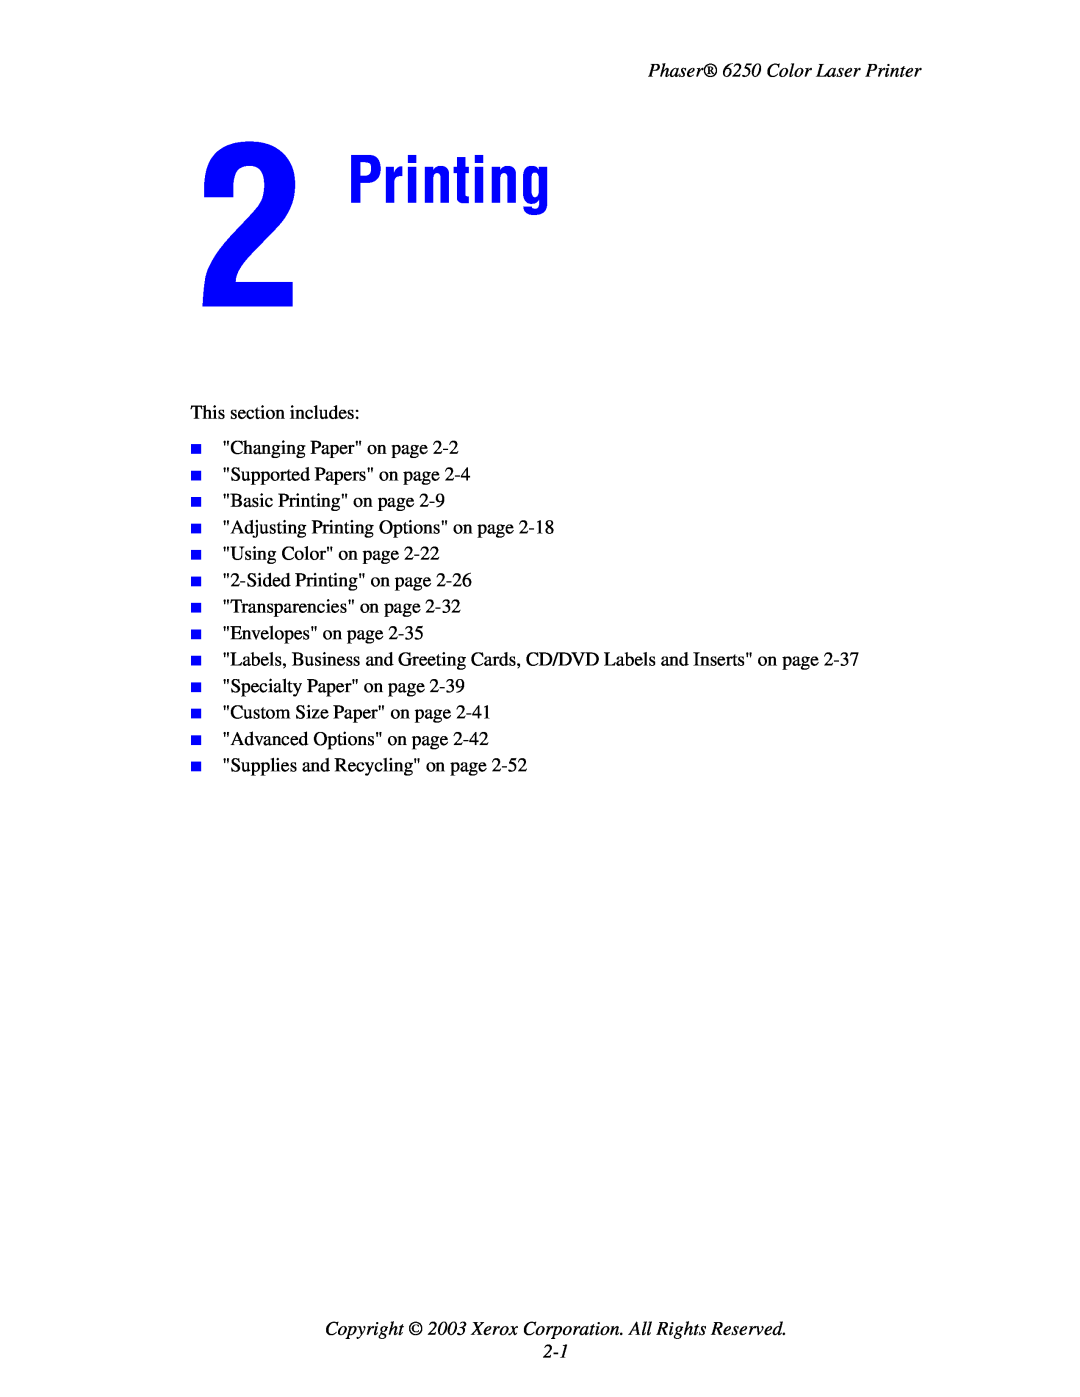 Xerox manual Printing, Copyright 2003 Xerox Corporation. All Rights Reserved 2-1, Phaser 6250 Color Laser Printer 